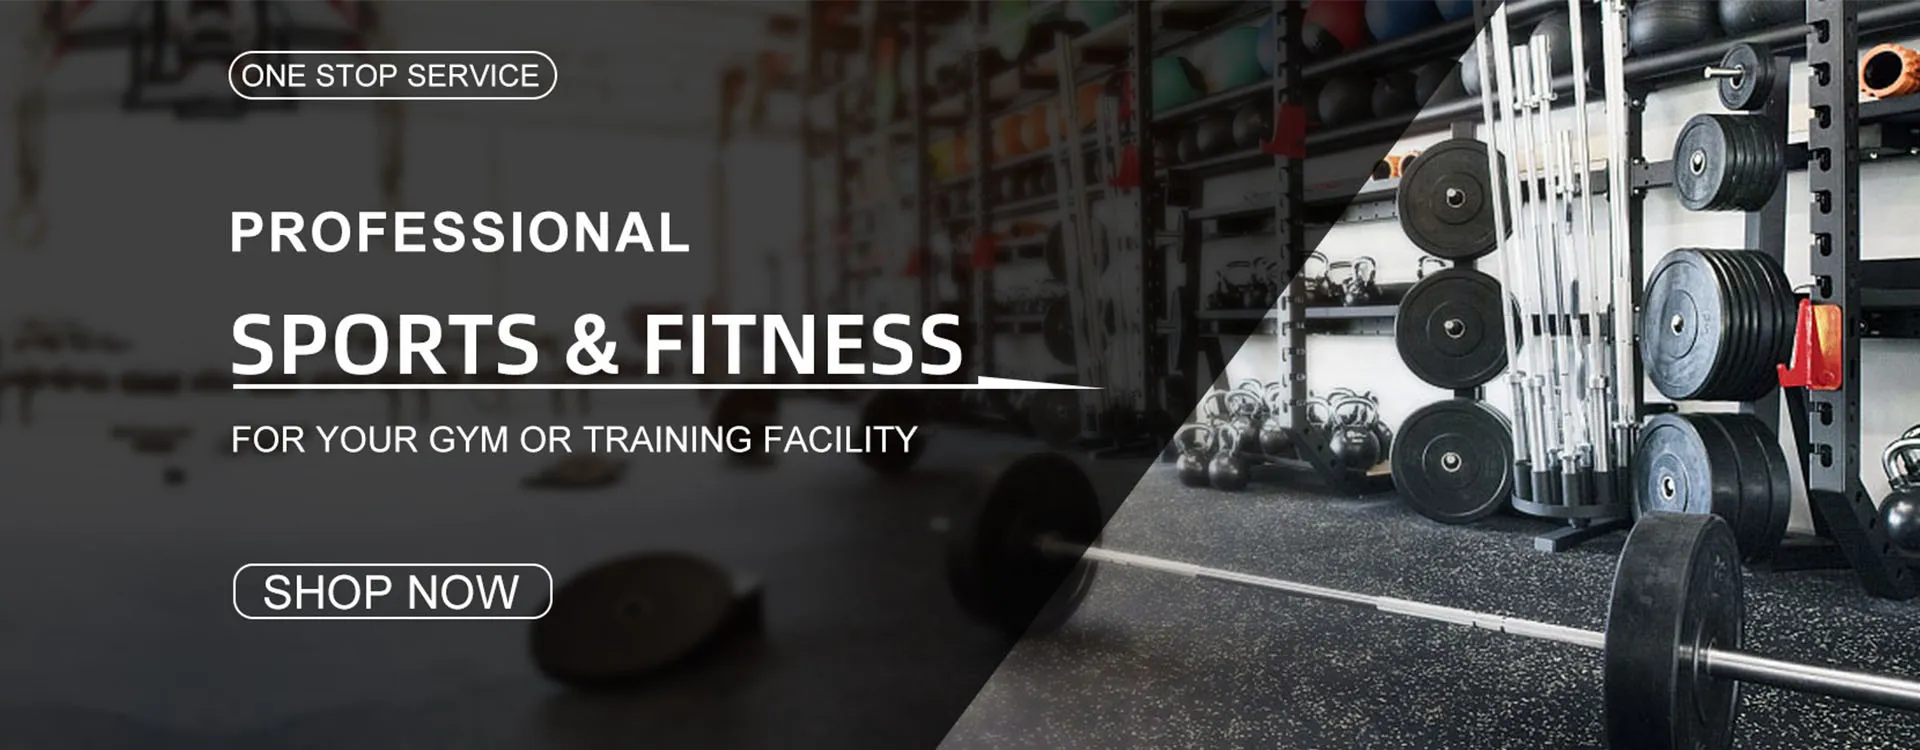 PROFESSIONAL SPORTS & FITNESS<br />Gym and Fitness - Haiteng Fitness